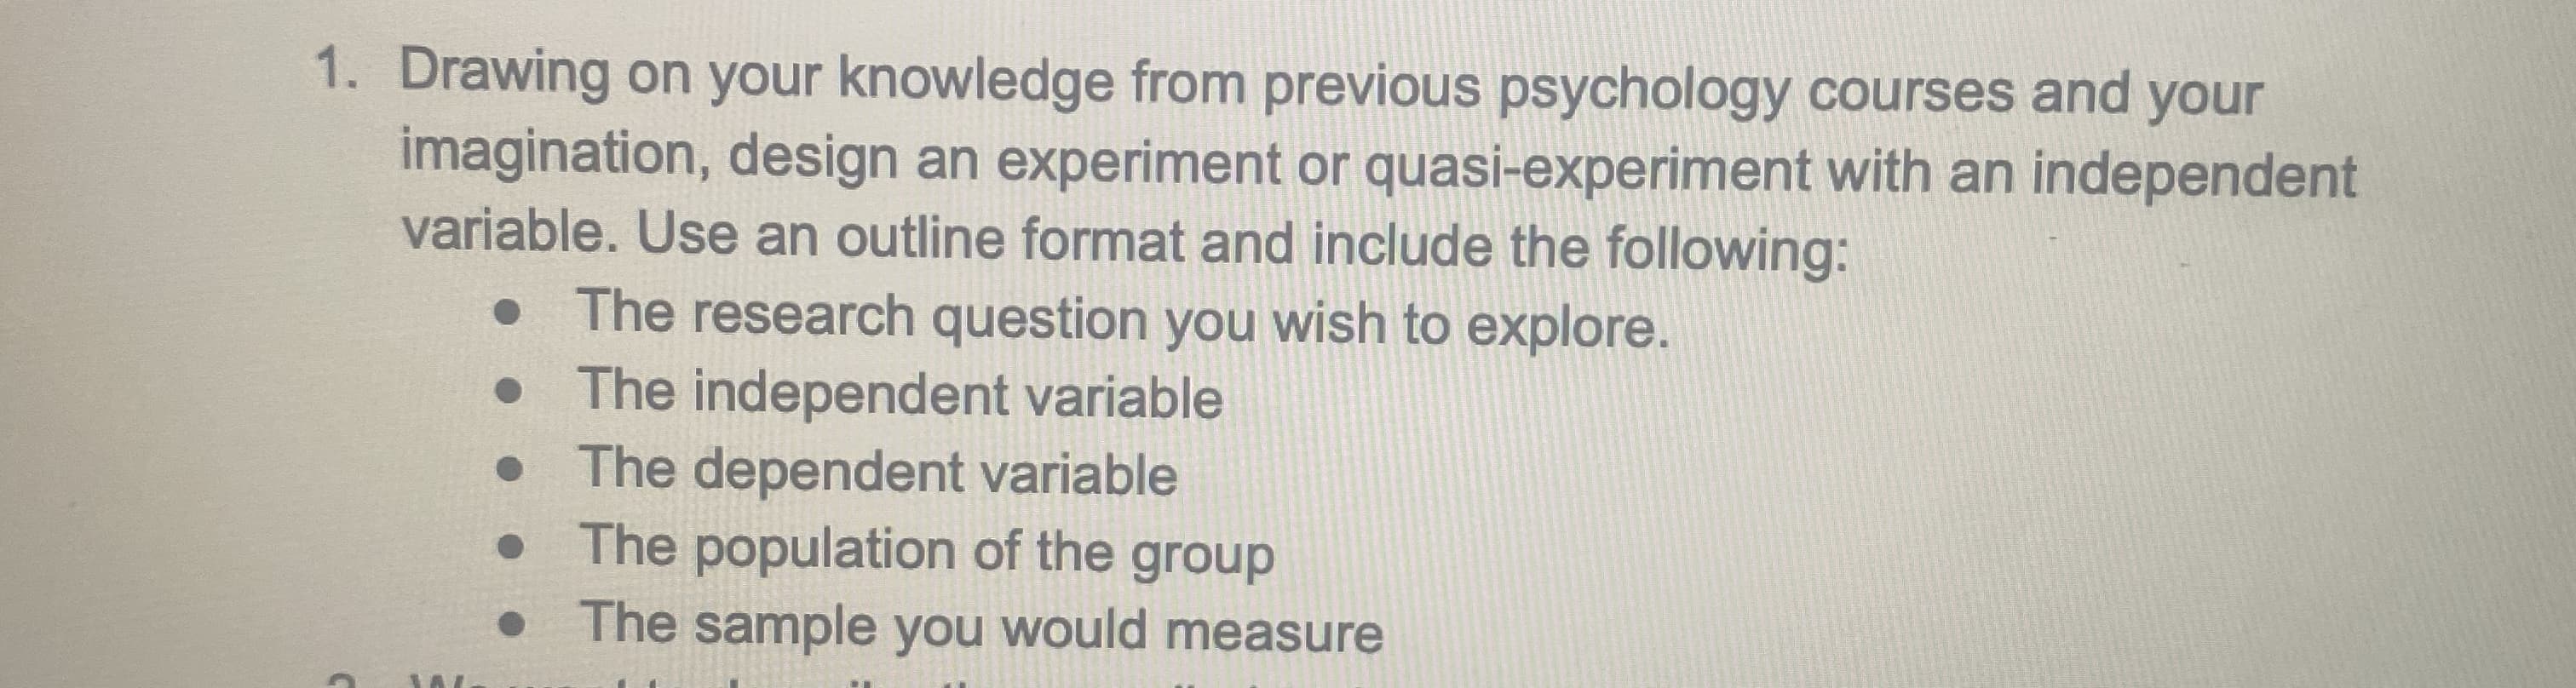 1. Drawing on your knowledge from previous psychology courses and your
imagination, design an experiment or quasi-experiment with an independent
variable. Use an outline format and include the following:
• The research question you wish to explore.
• The independent variable
• The dependent variable
The population of the group
• The sample you would measure
